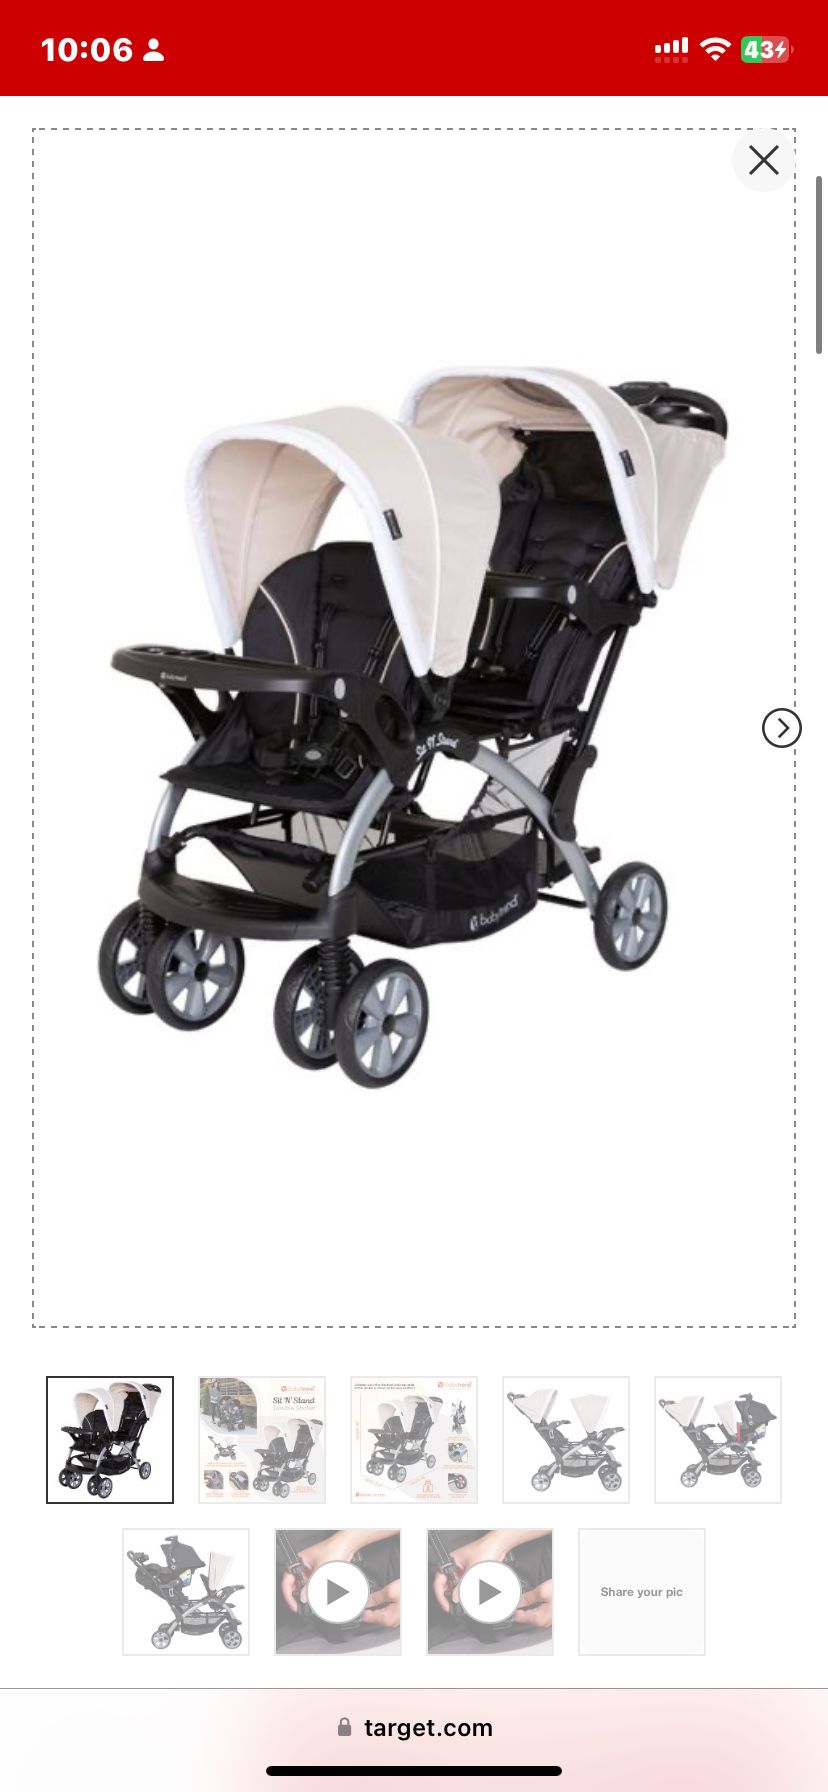 Baby Trend Sit And Stand Stroller